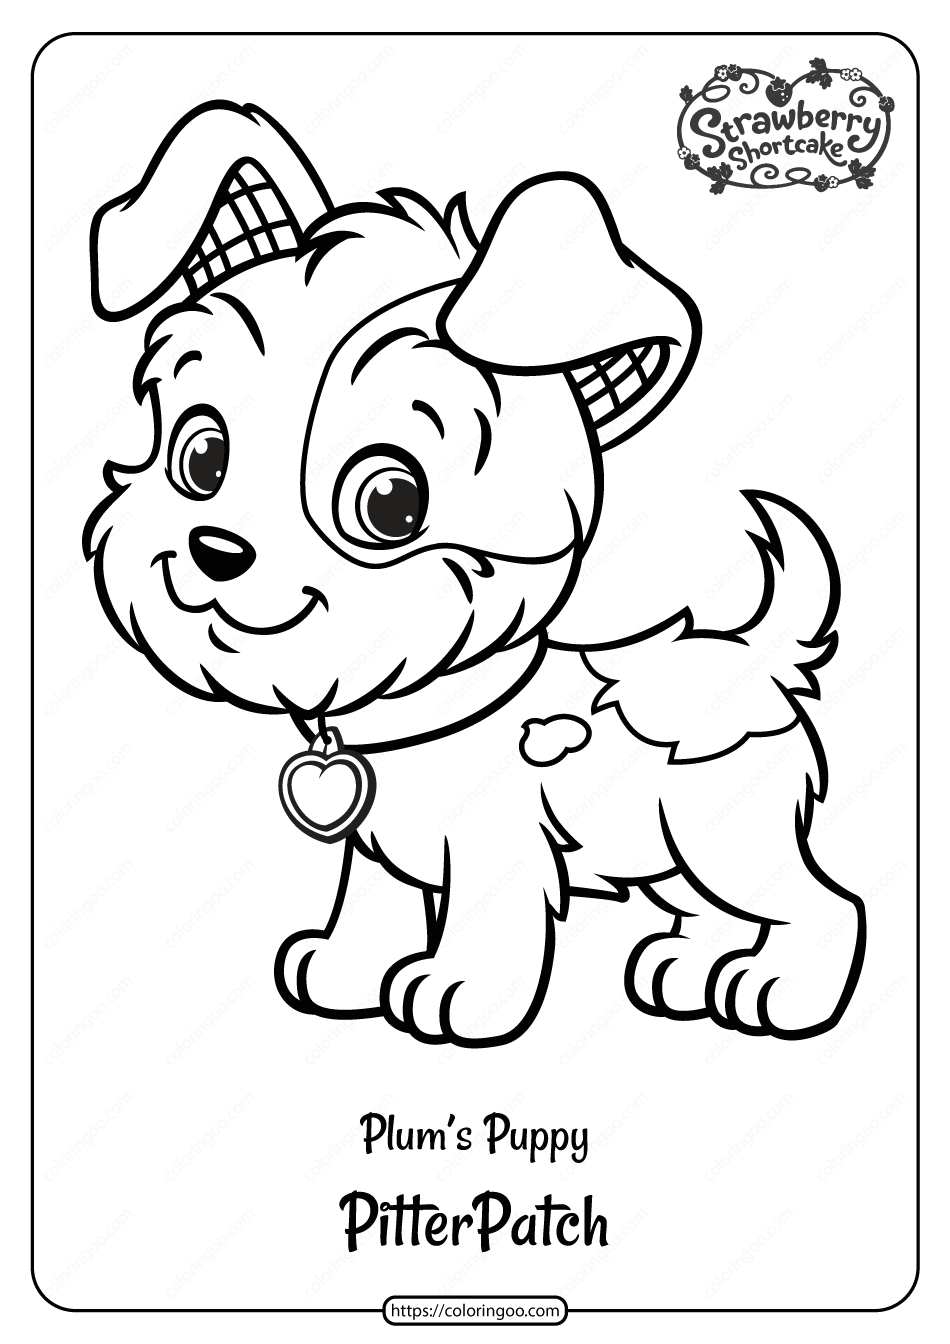 Free Printable Plum’s Puppy Pitterpatch Coloring Page